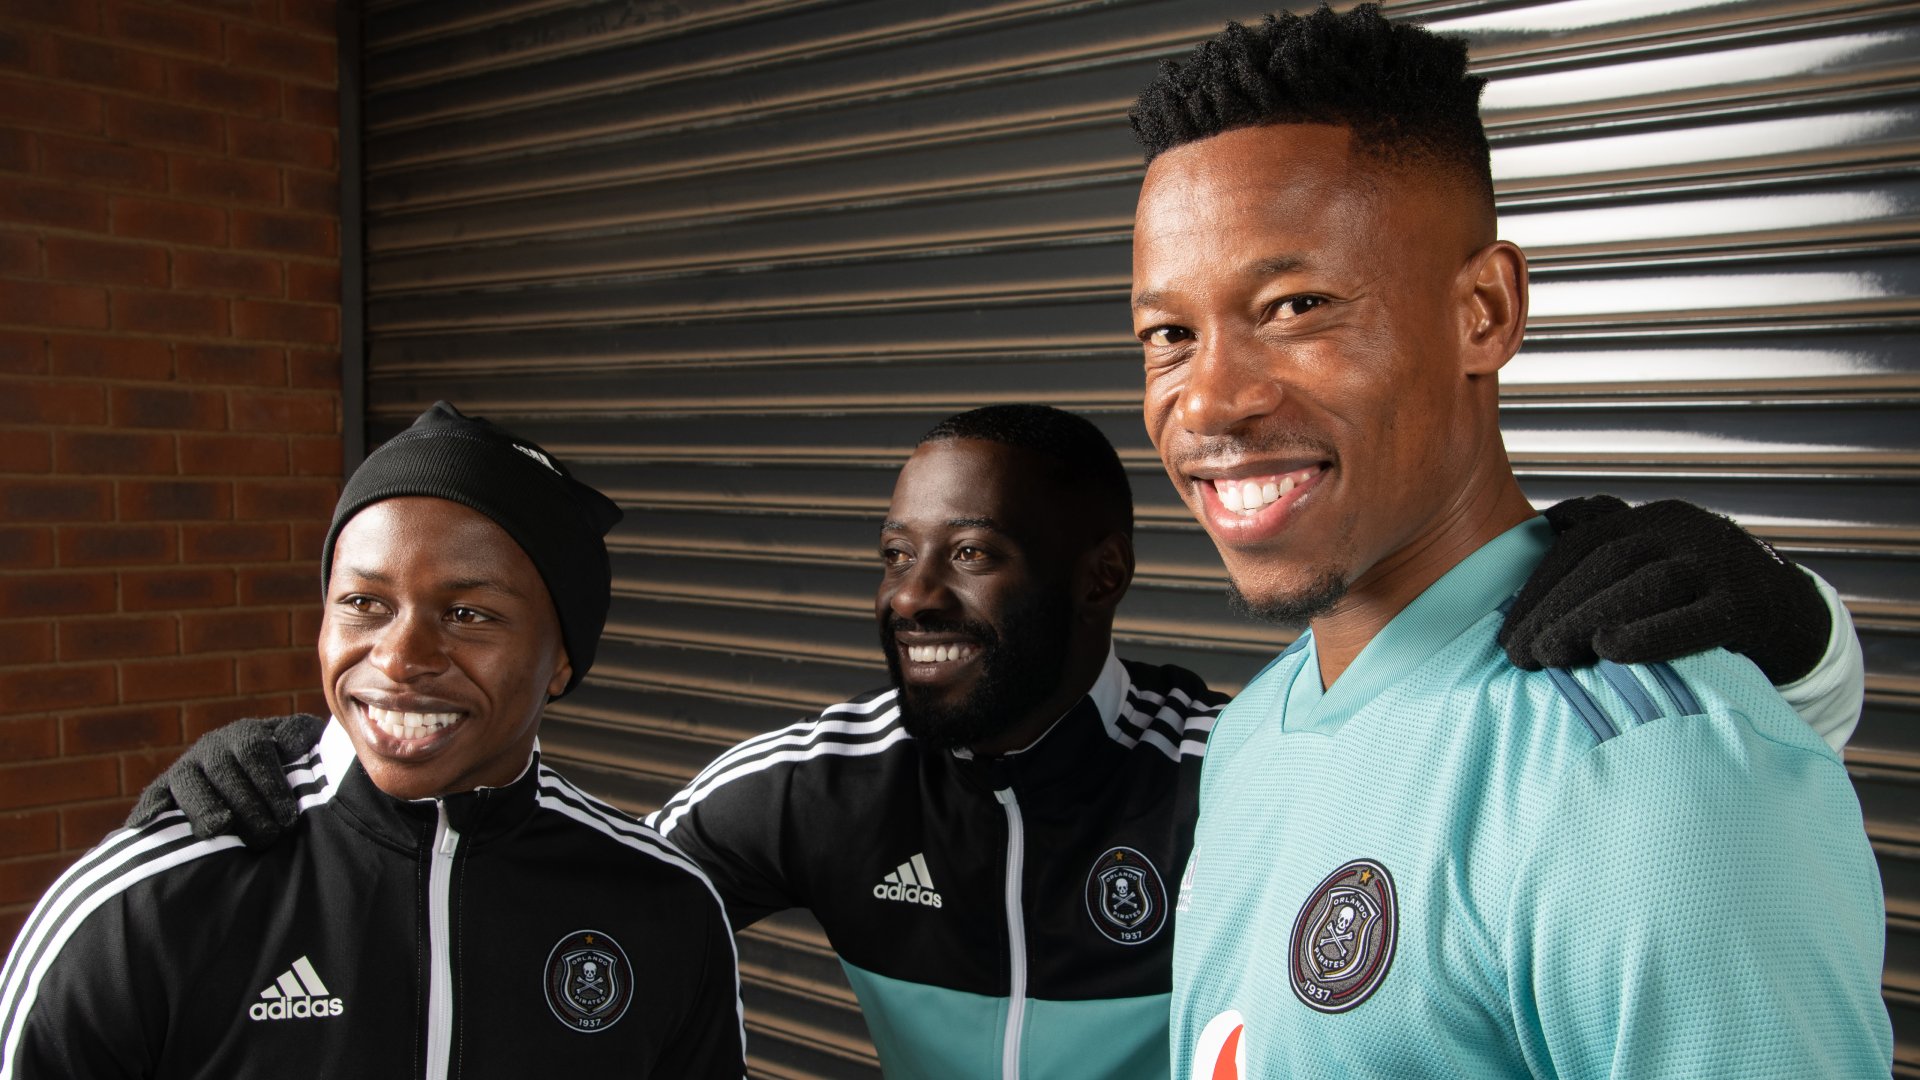 adidasZA on X: Get the look for on and off the field, the mint